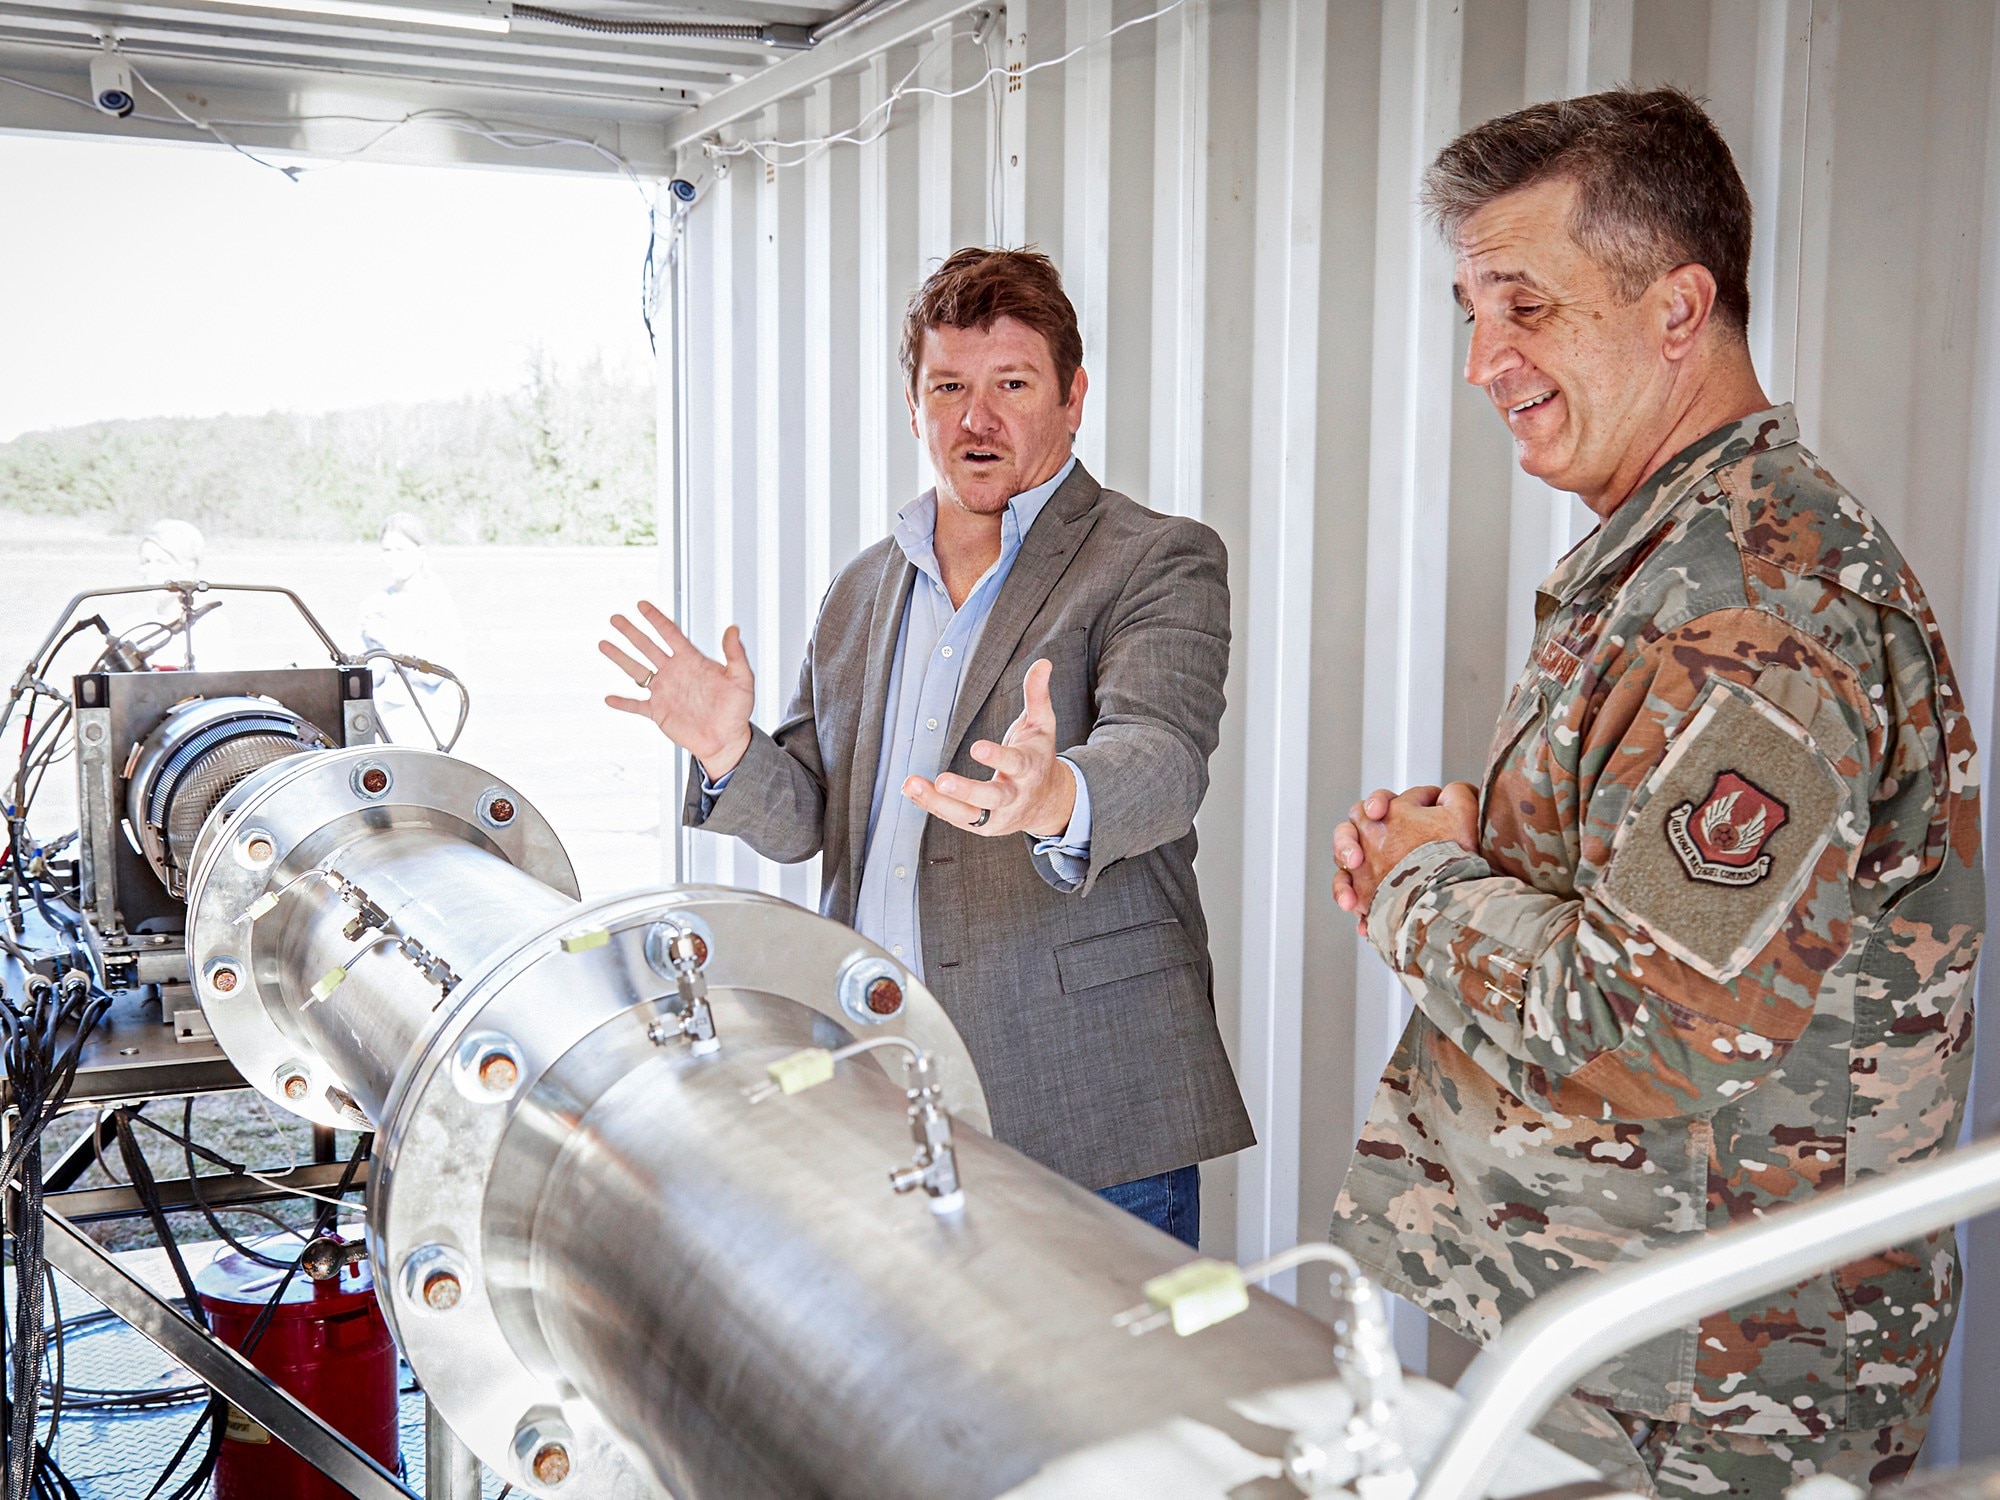 Brig. Gen. Ryan Britton, (right) Program Executive Officer of the Presidential and Executive Airlift Directorate, visited Hermeus Corporation on November 13 for a demonstration of the company’s Mach 5 engine. (Courtesy photo)